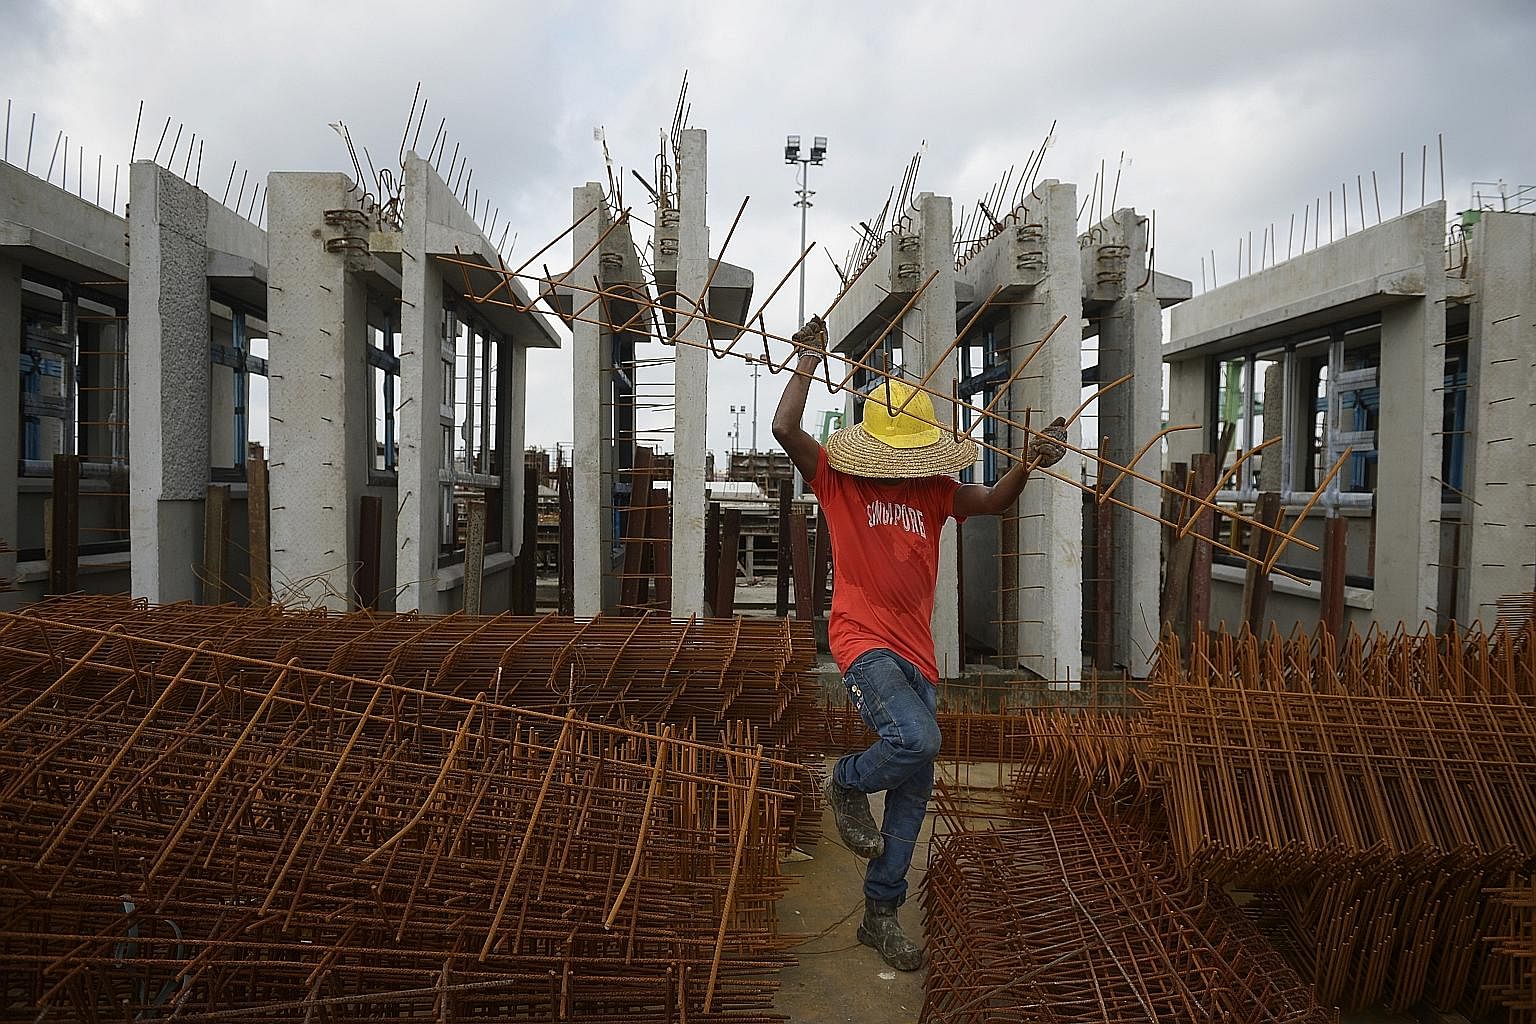 A worker sorting out reinforcing steel bars, known as “rebars”. In the background are HDB facades that are waiting to be delivered to the worksite.